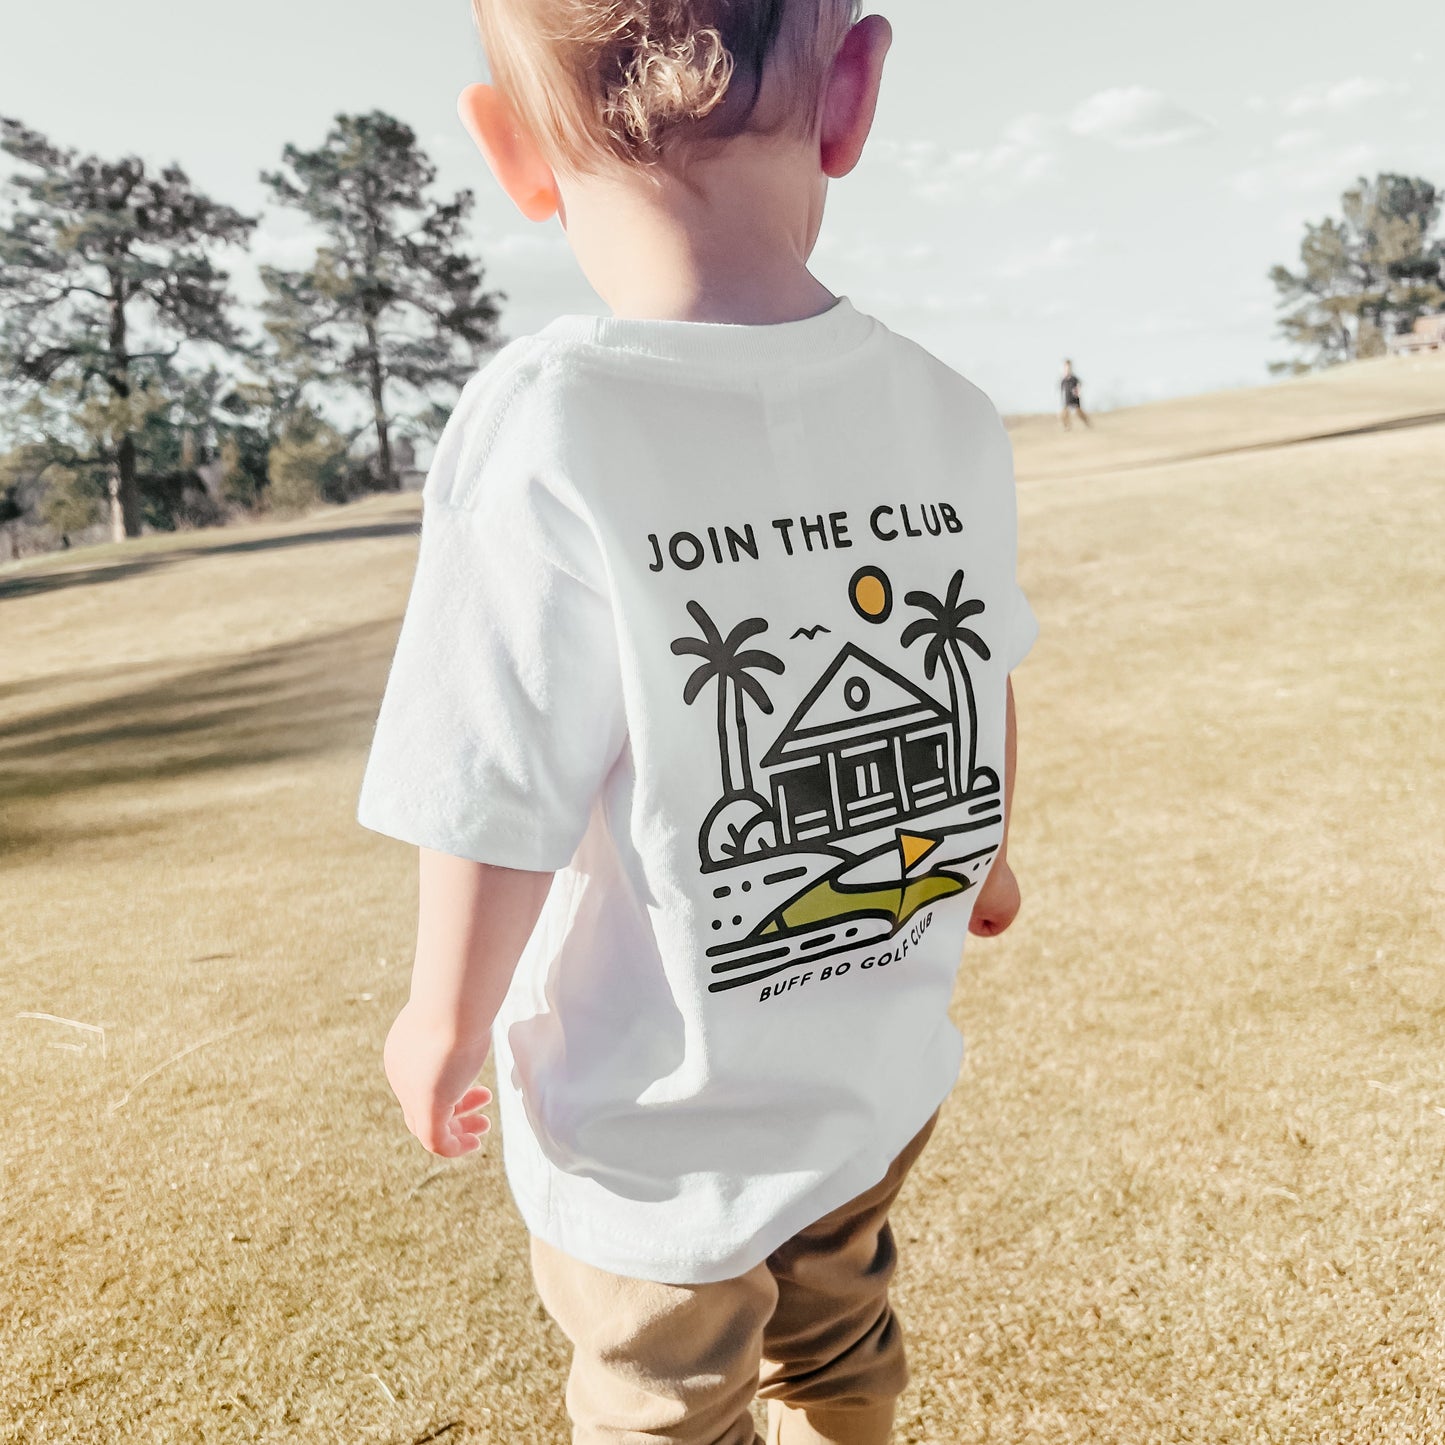 Join the Club Golf Shirt Toddler Youth T-Shirt